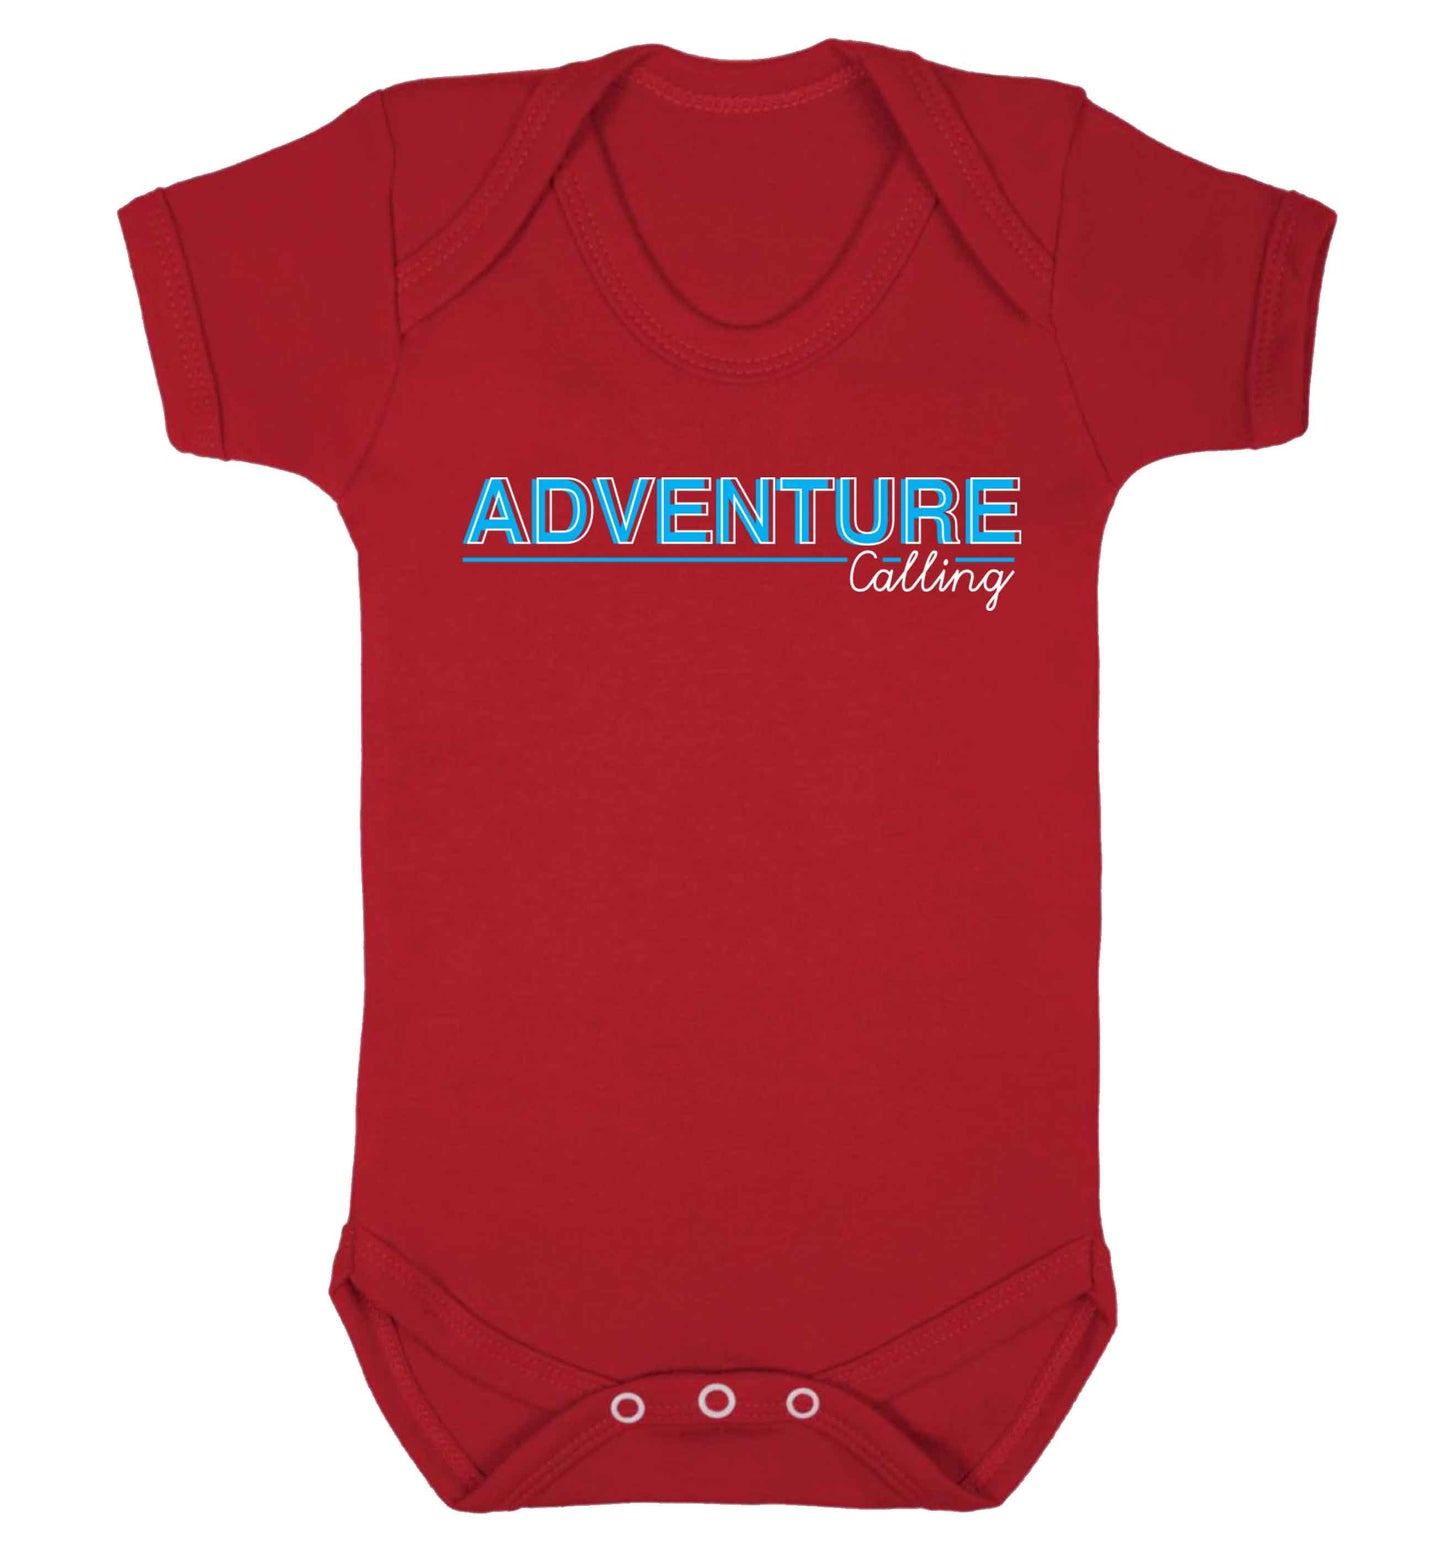 Adventure calling Baby Vest red 18-24 months